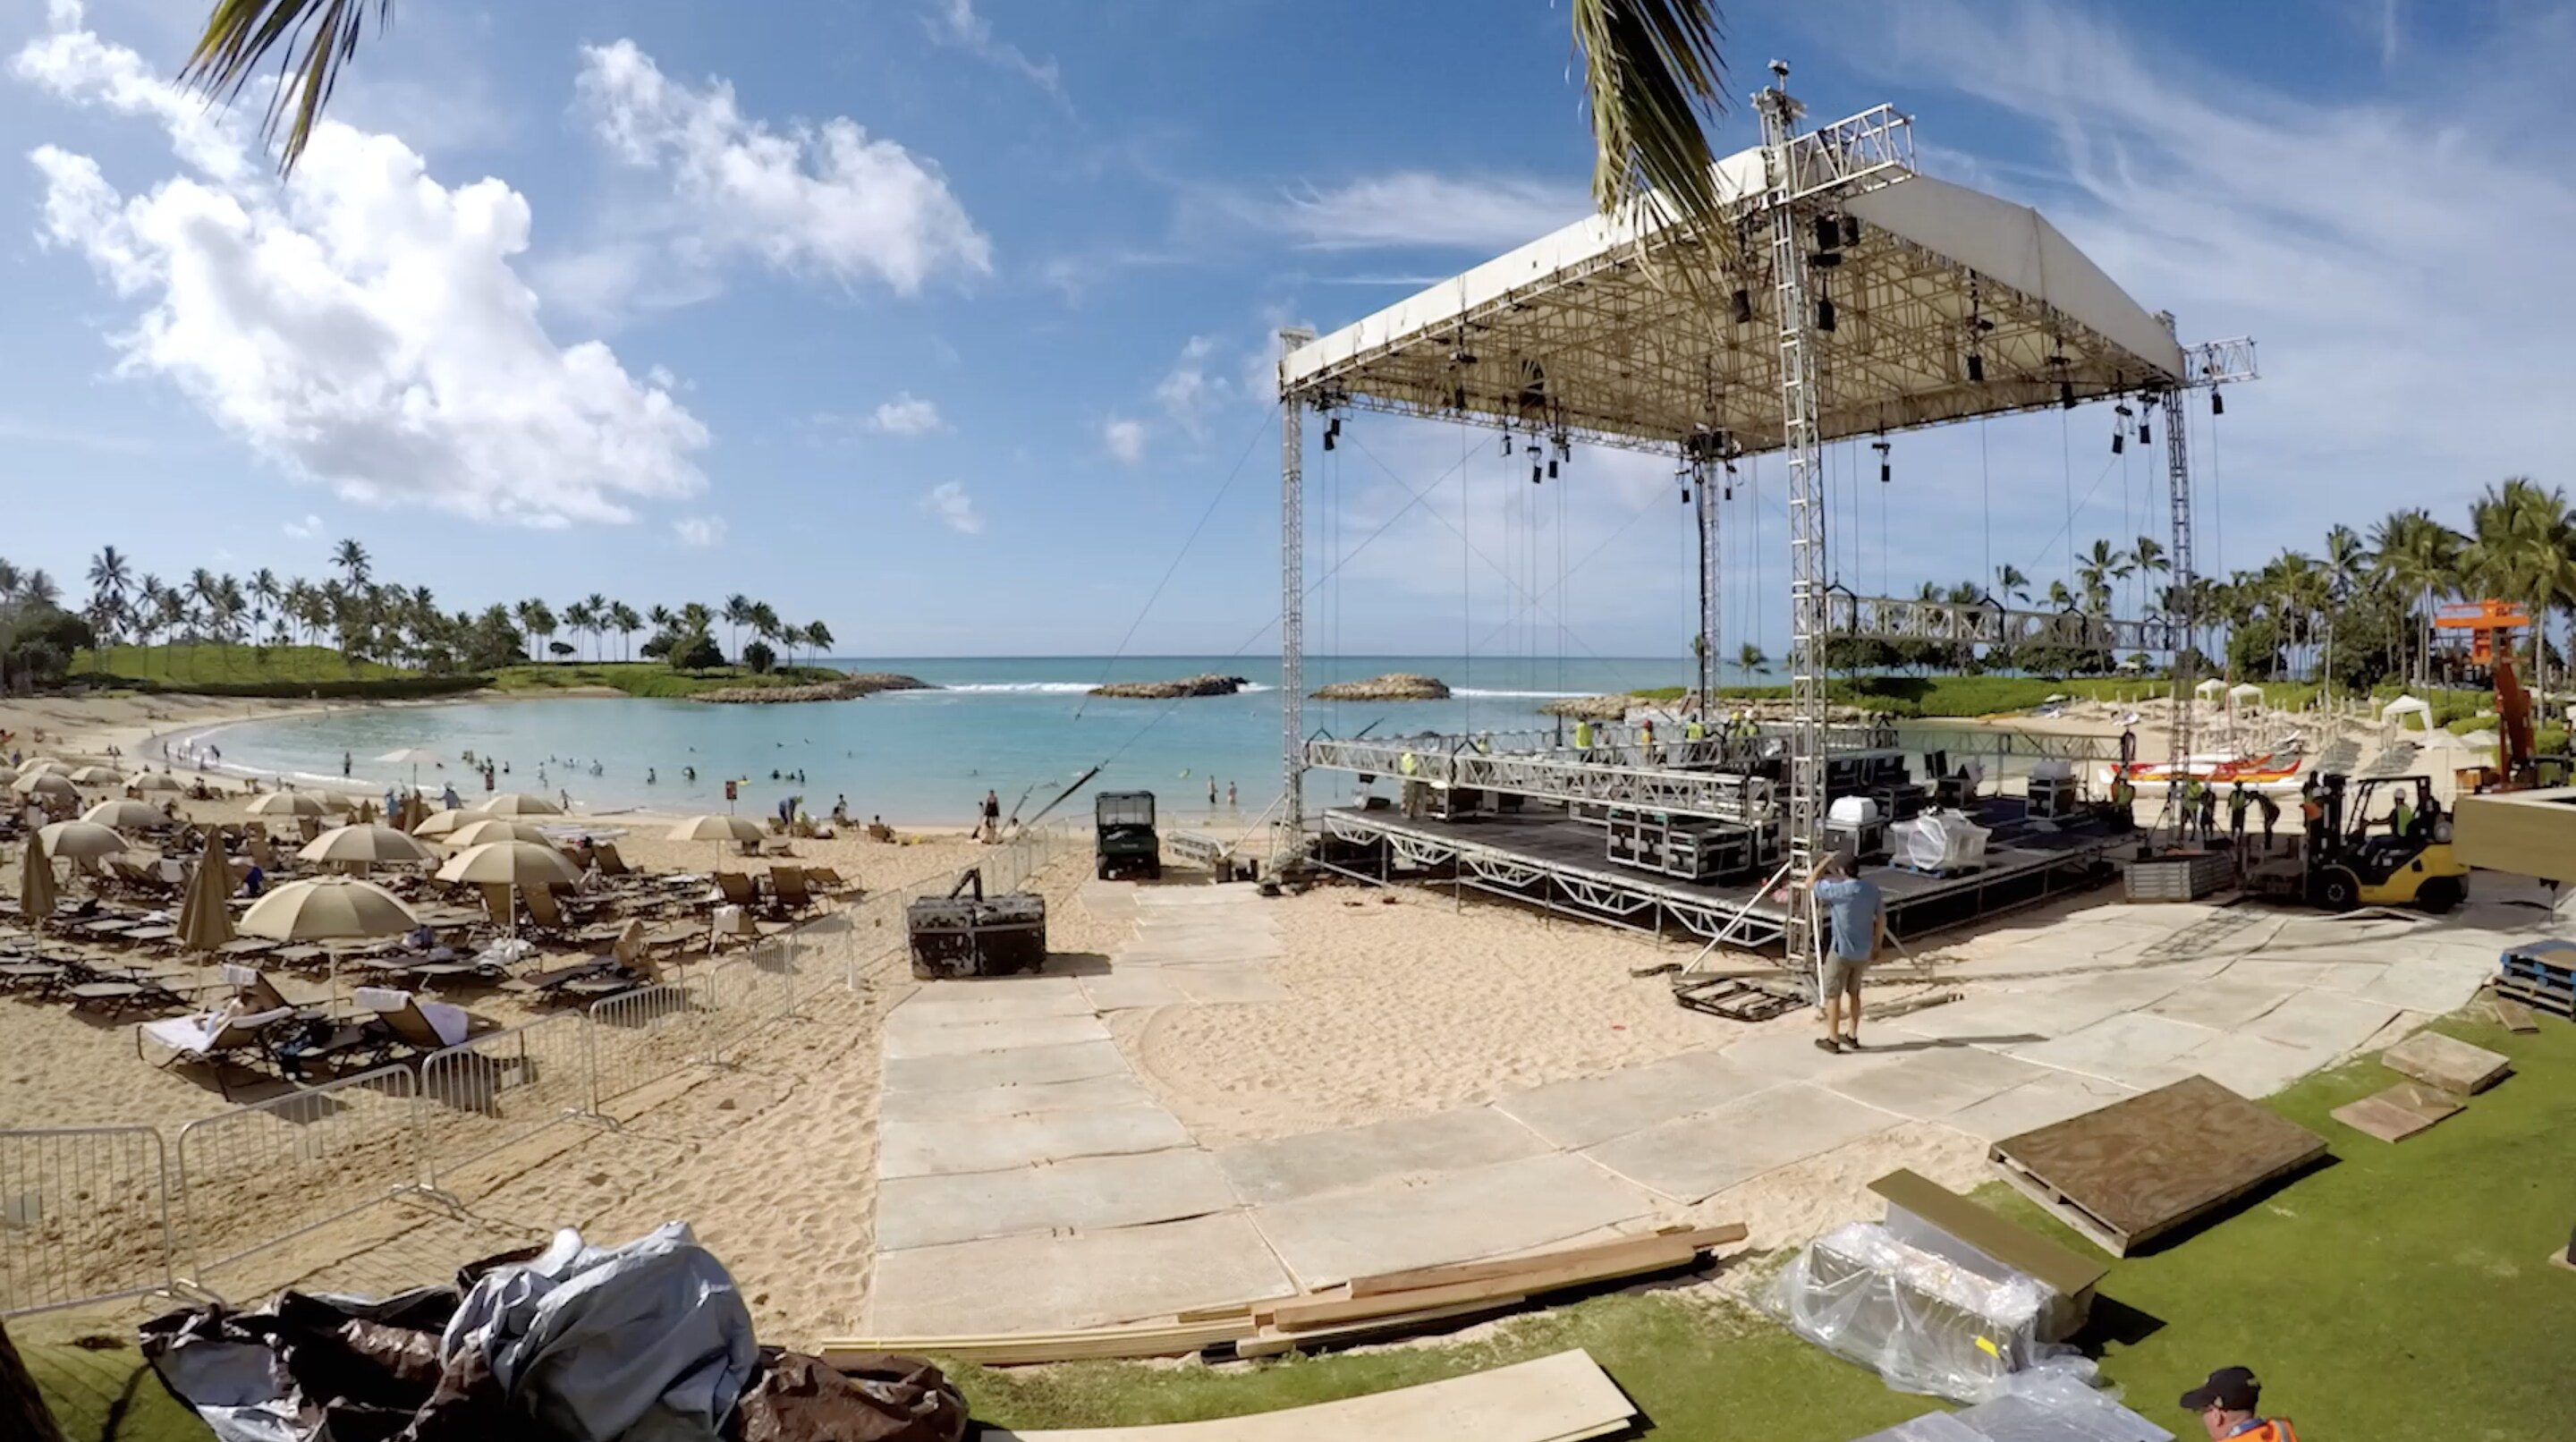 setting the stage for Idol at Aulani